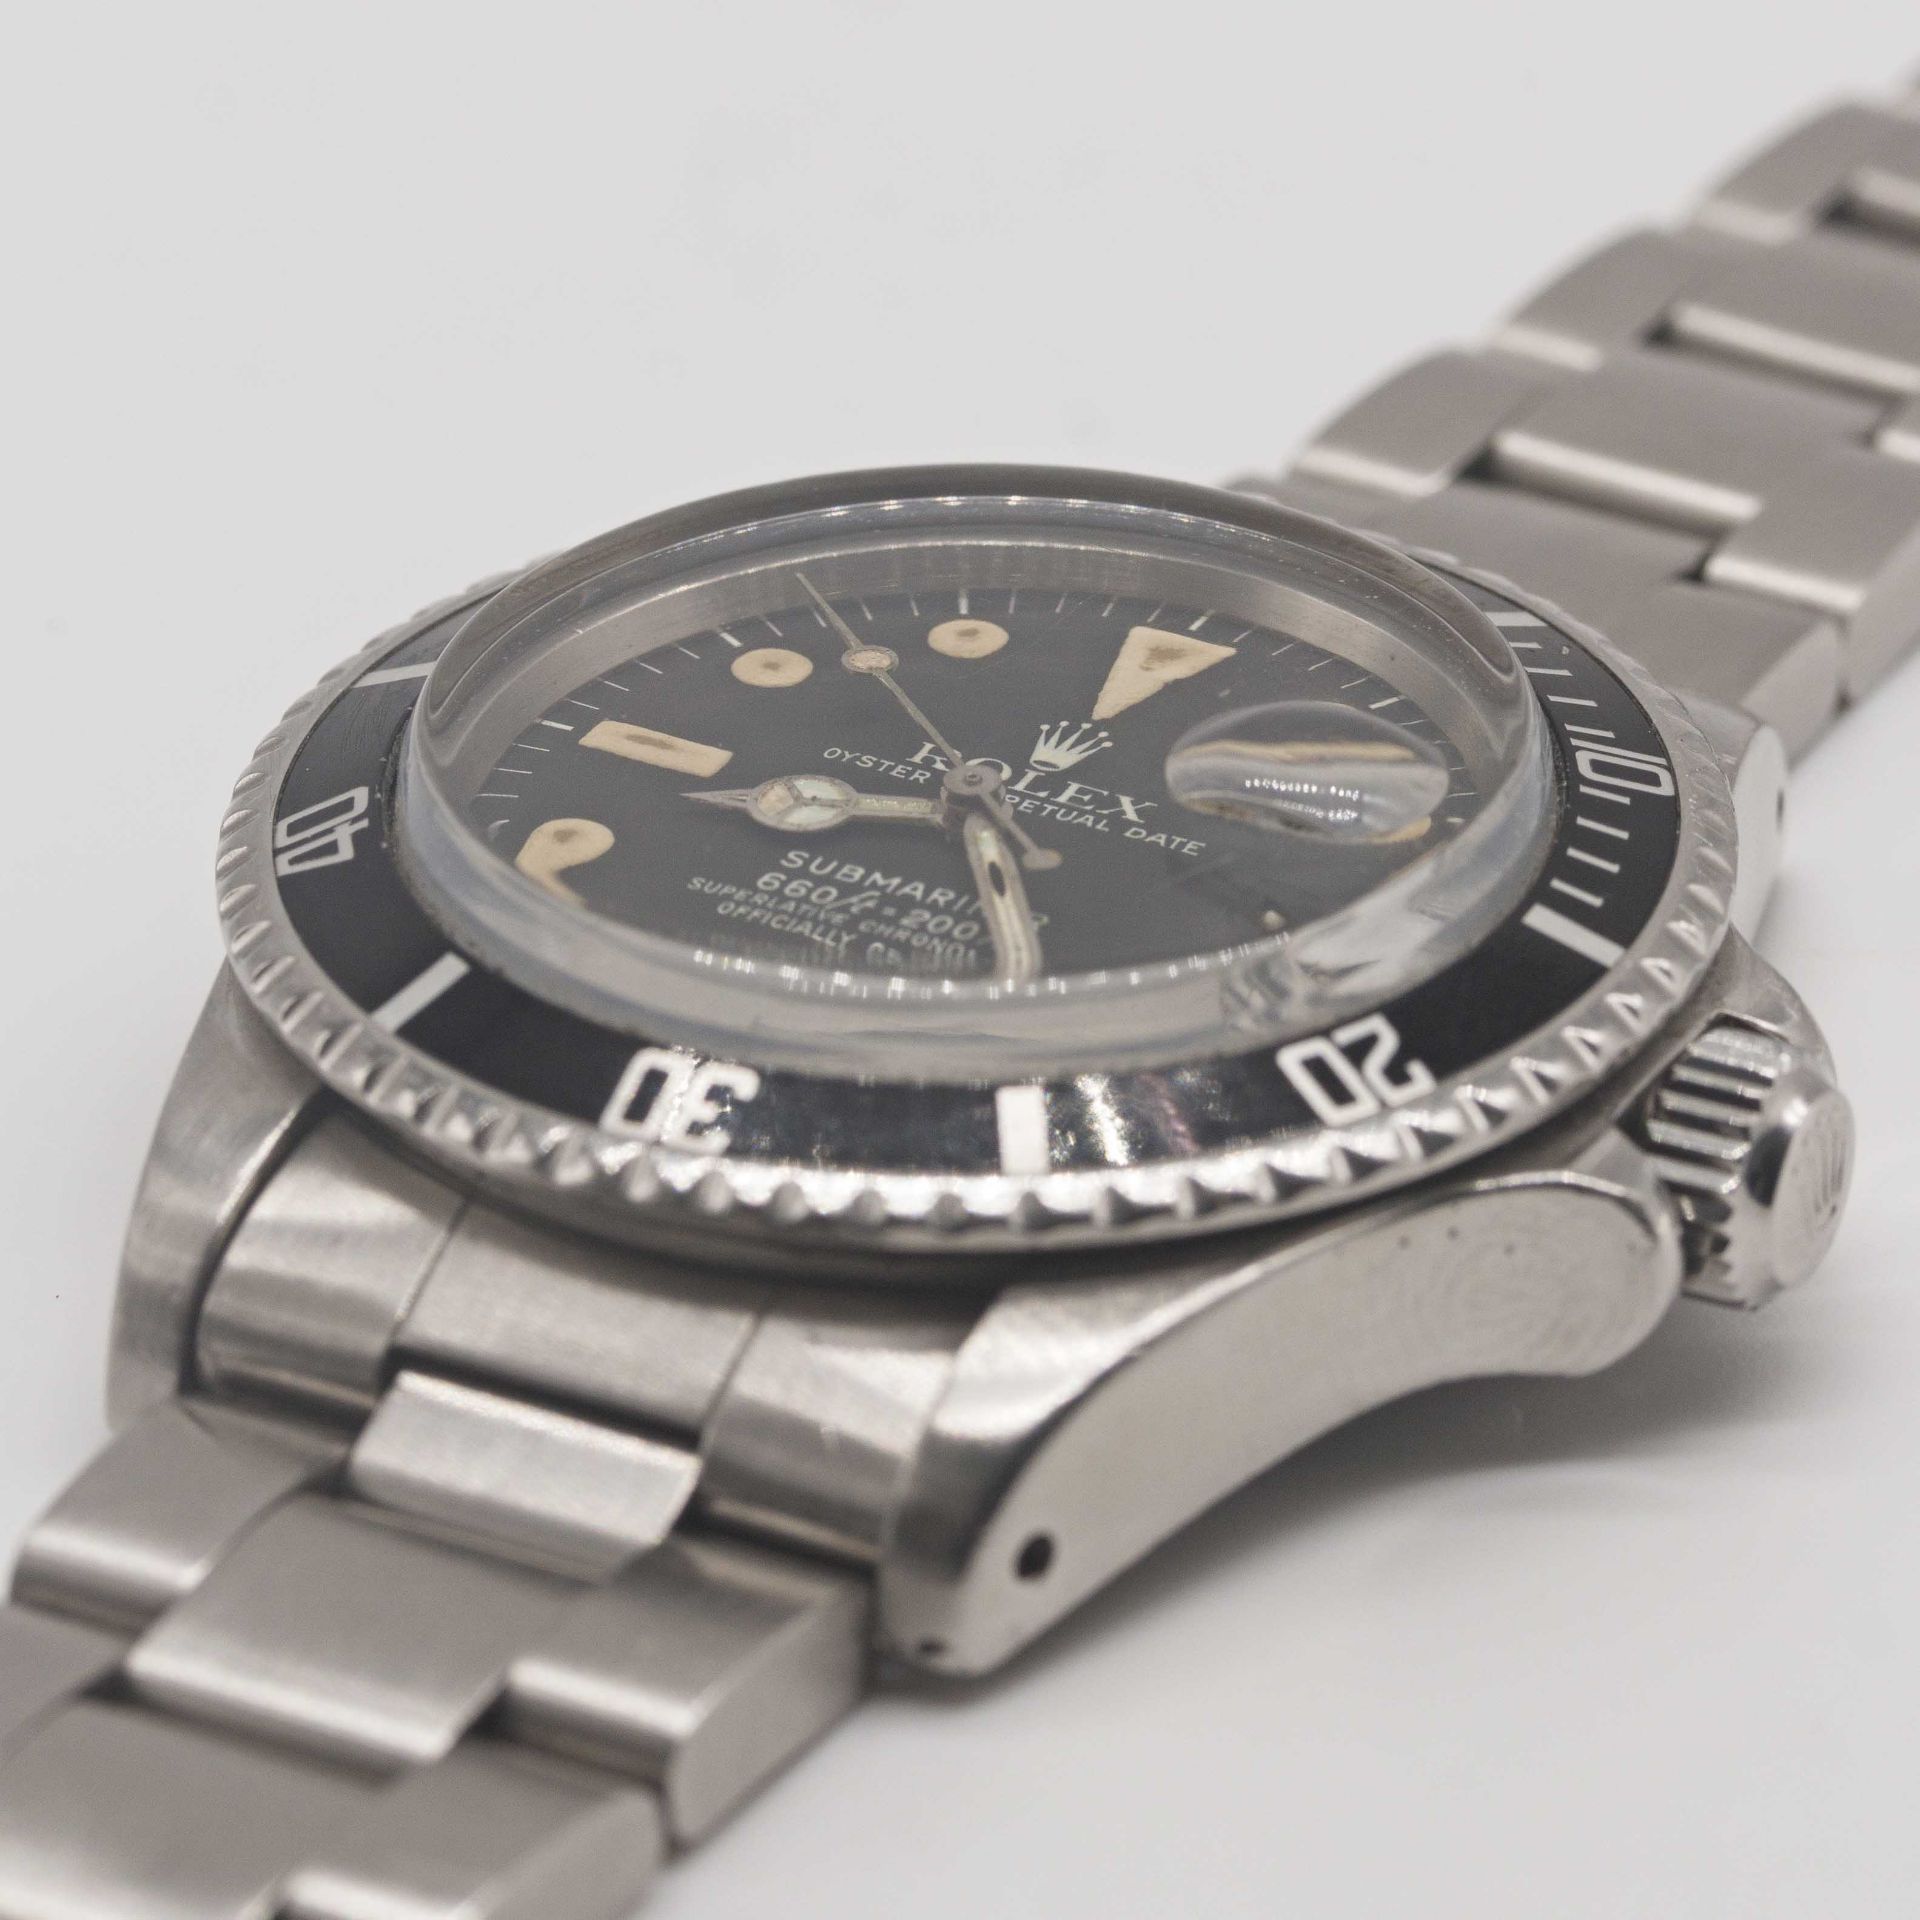 A GENTLEMAN'S STAINLESS STEEL ROLEX OYSTER PERPETUAL DATE SUBMARINER BRACELET WATCH CIRCA 1978, REF. - Image 3 of 10